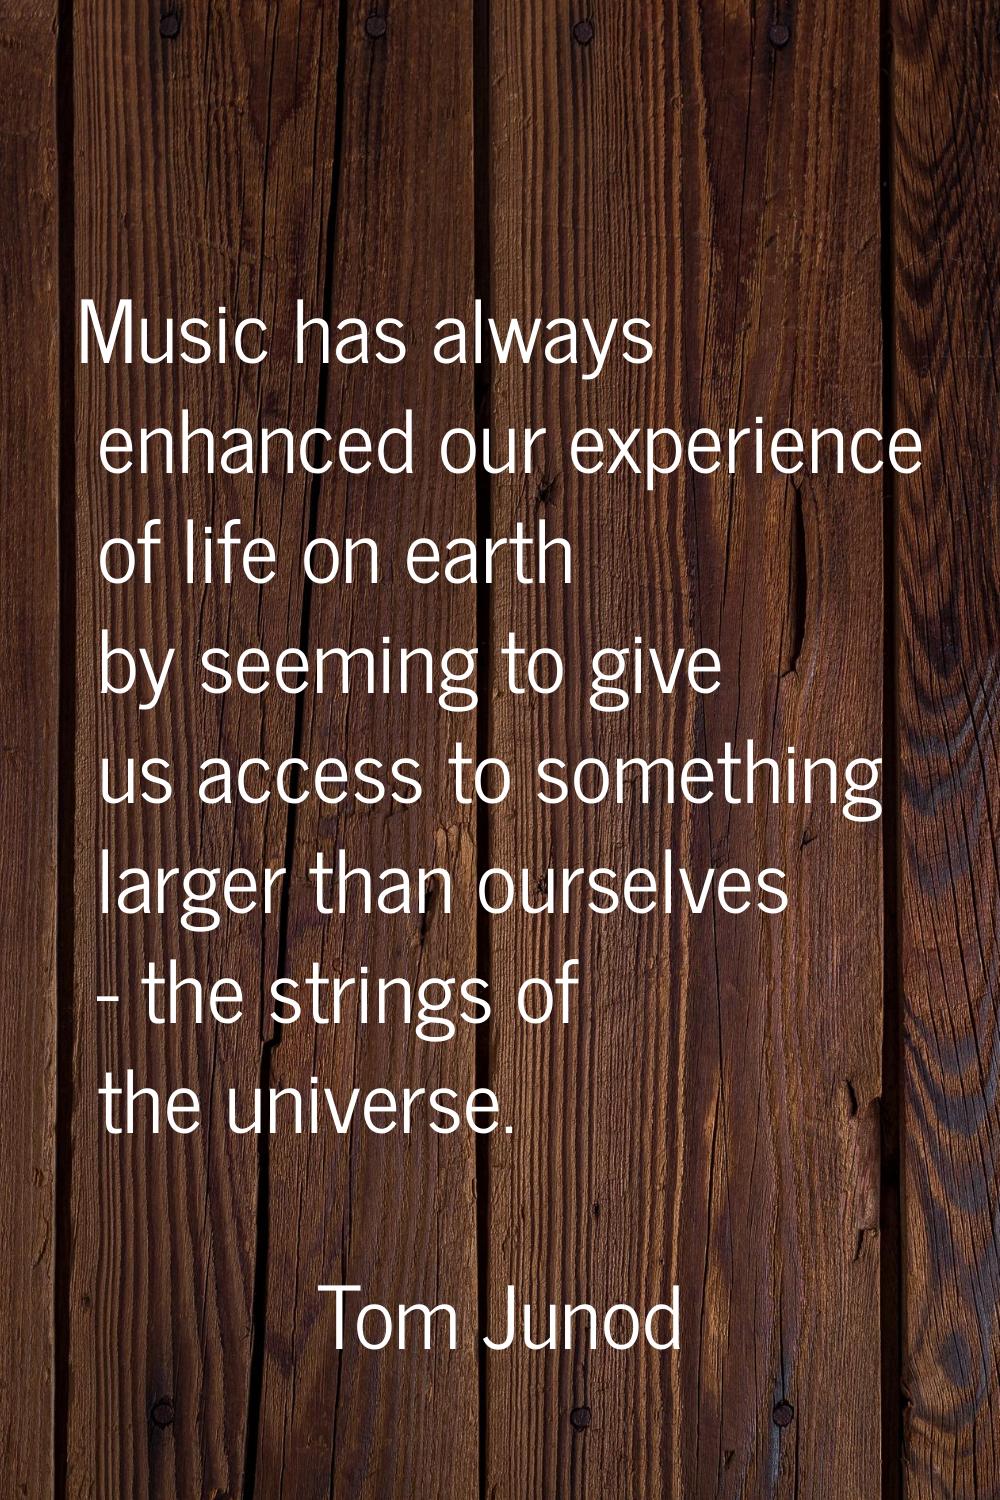 Music has always enhanced our experience of life on earth by seeming to give us access to something